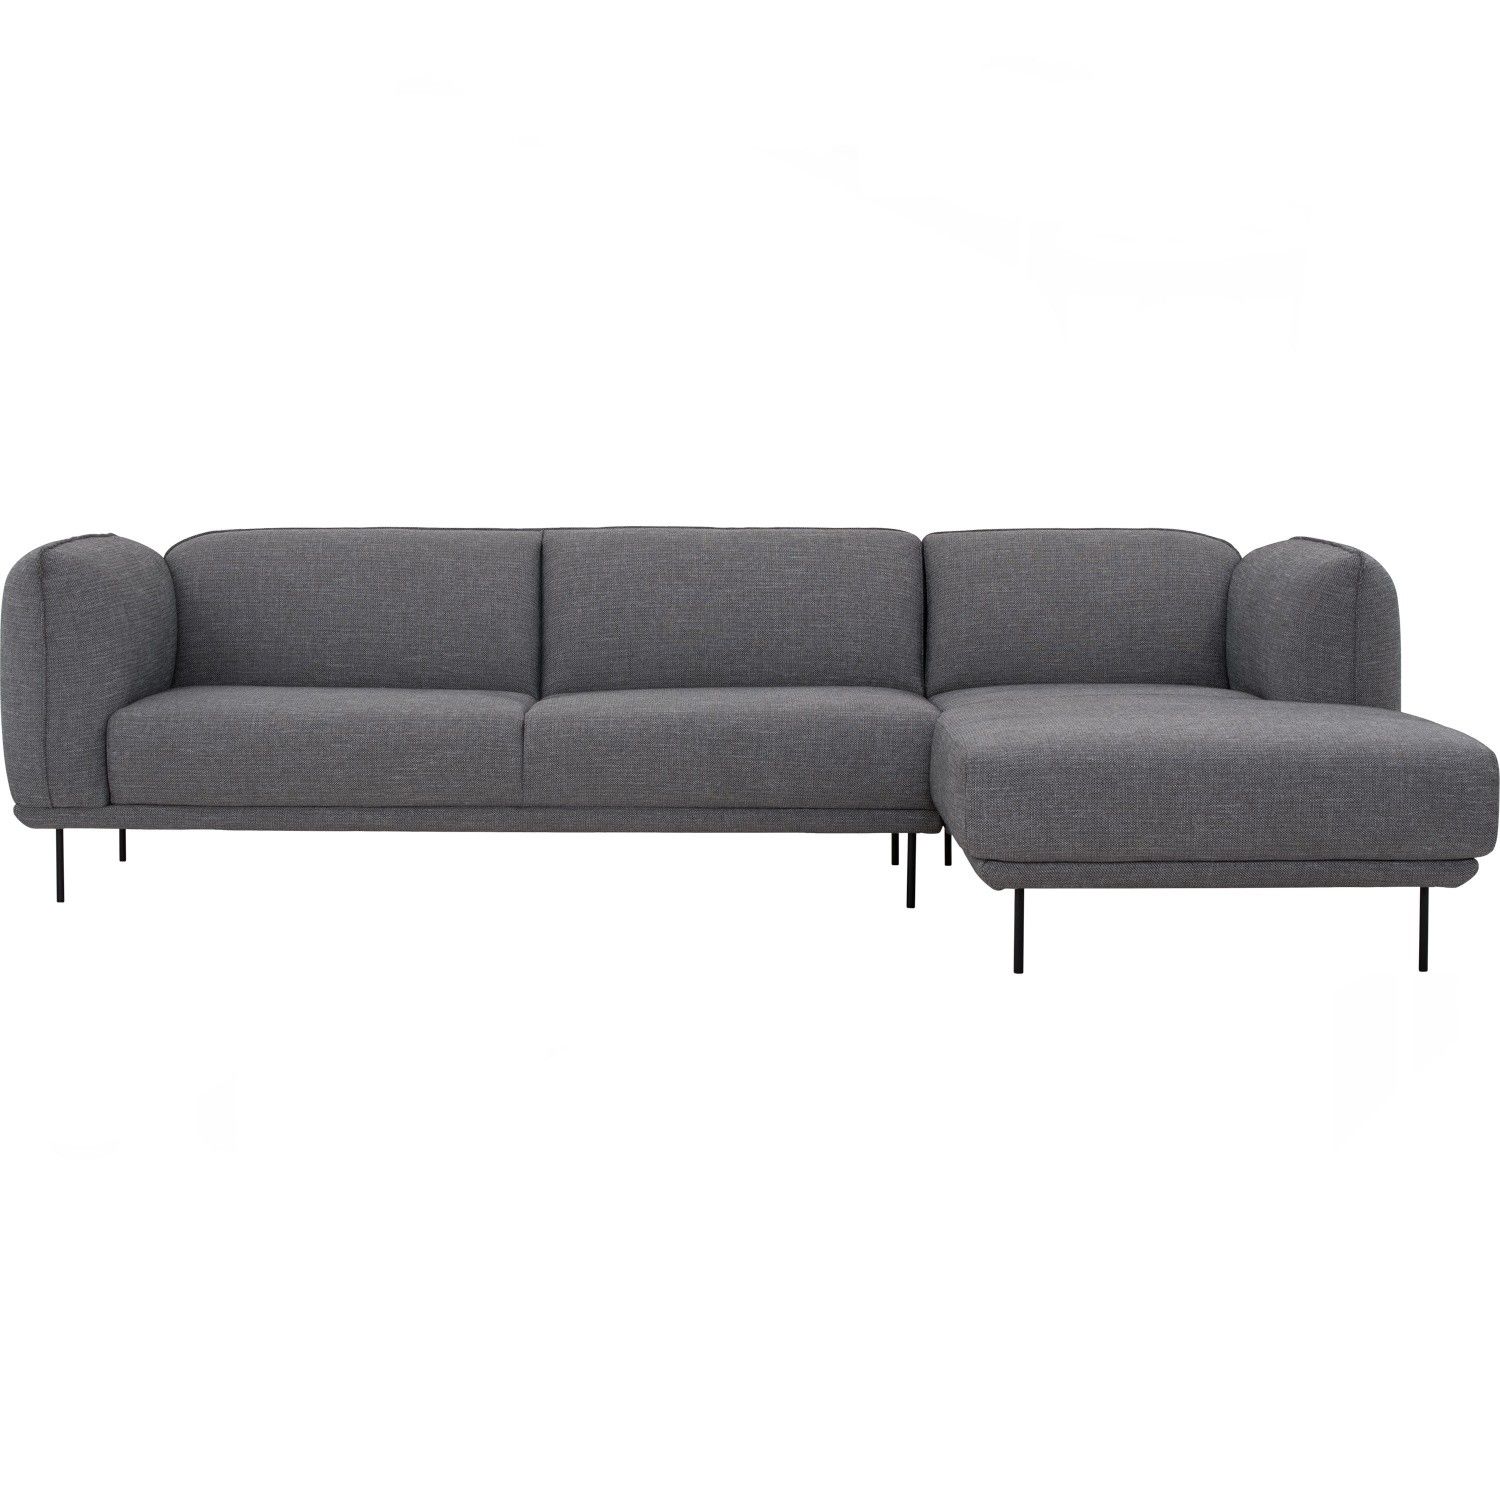 Miro 3 Seater L Shaped Sofa Grey – Furnituredirect.my With Regard To 3 Seat L Shaped Sofas In Black (Photo 15 of 15)